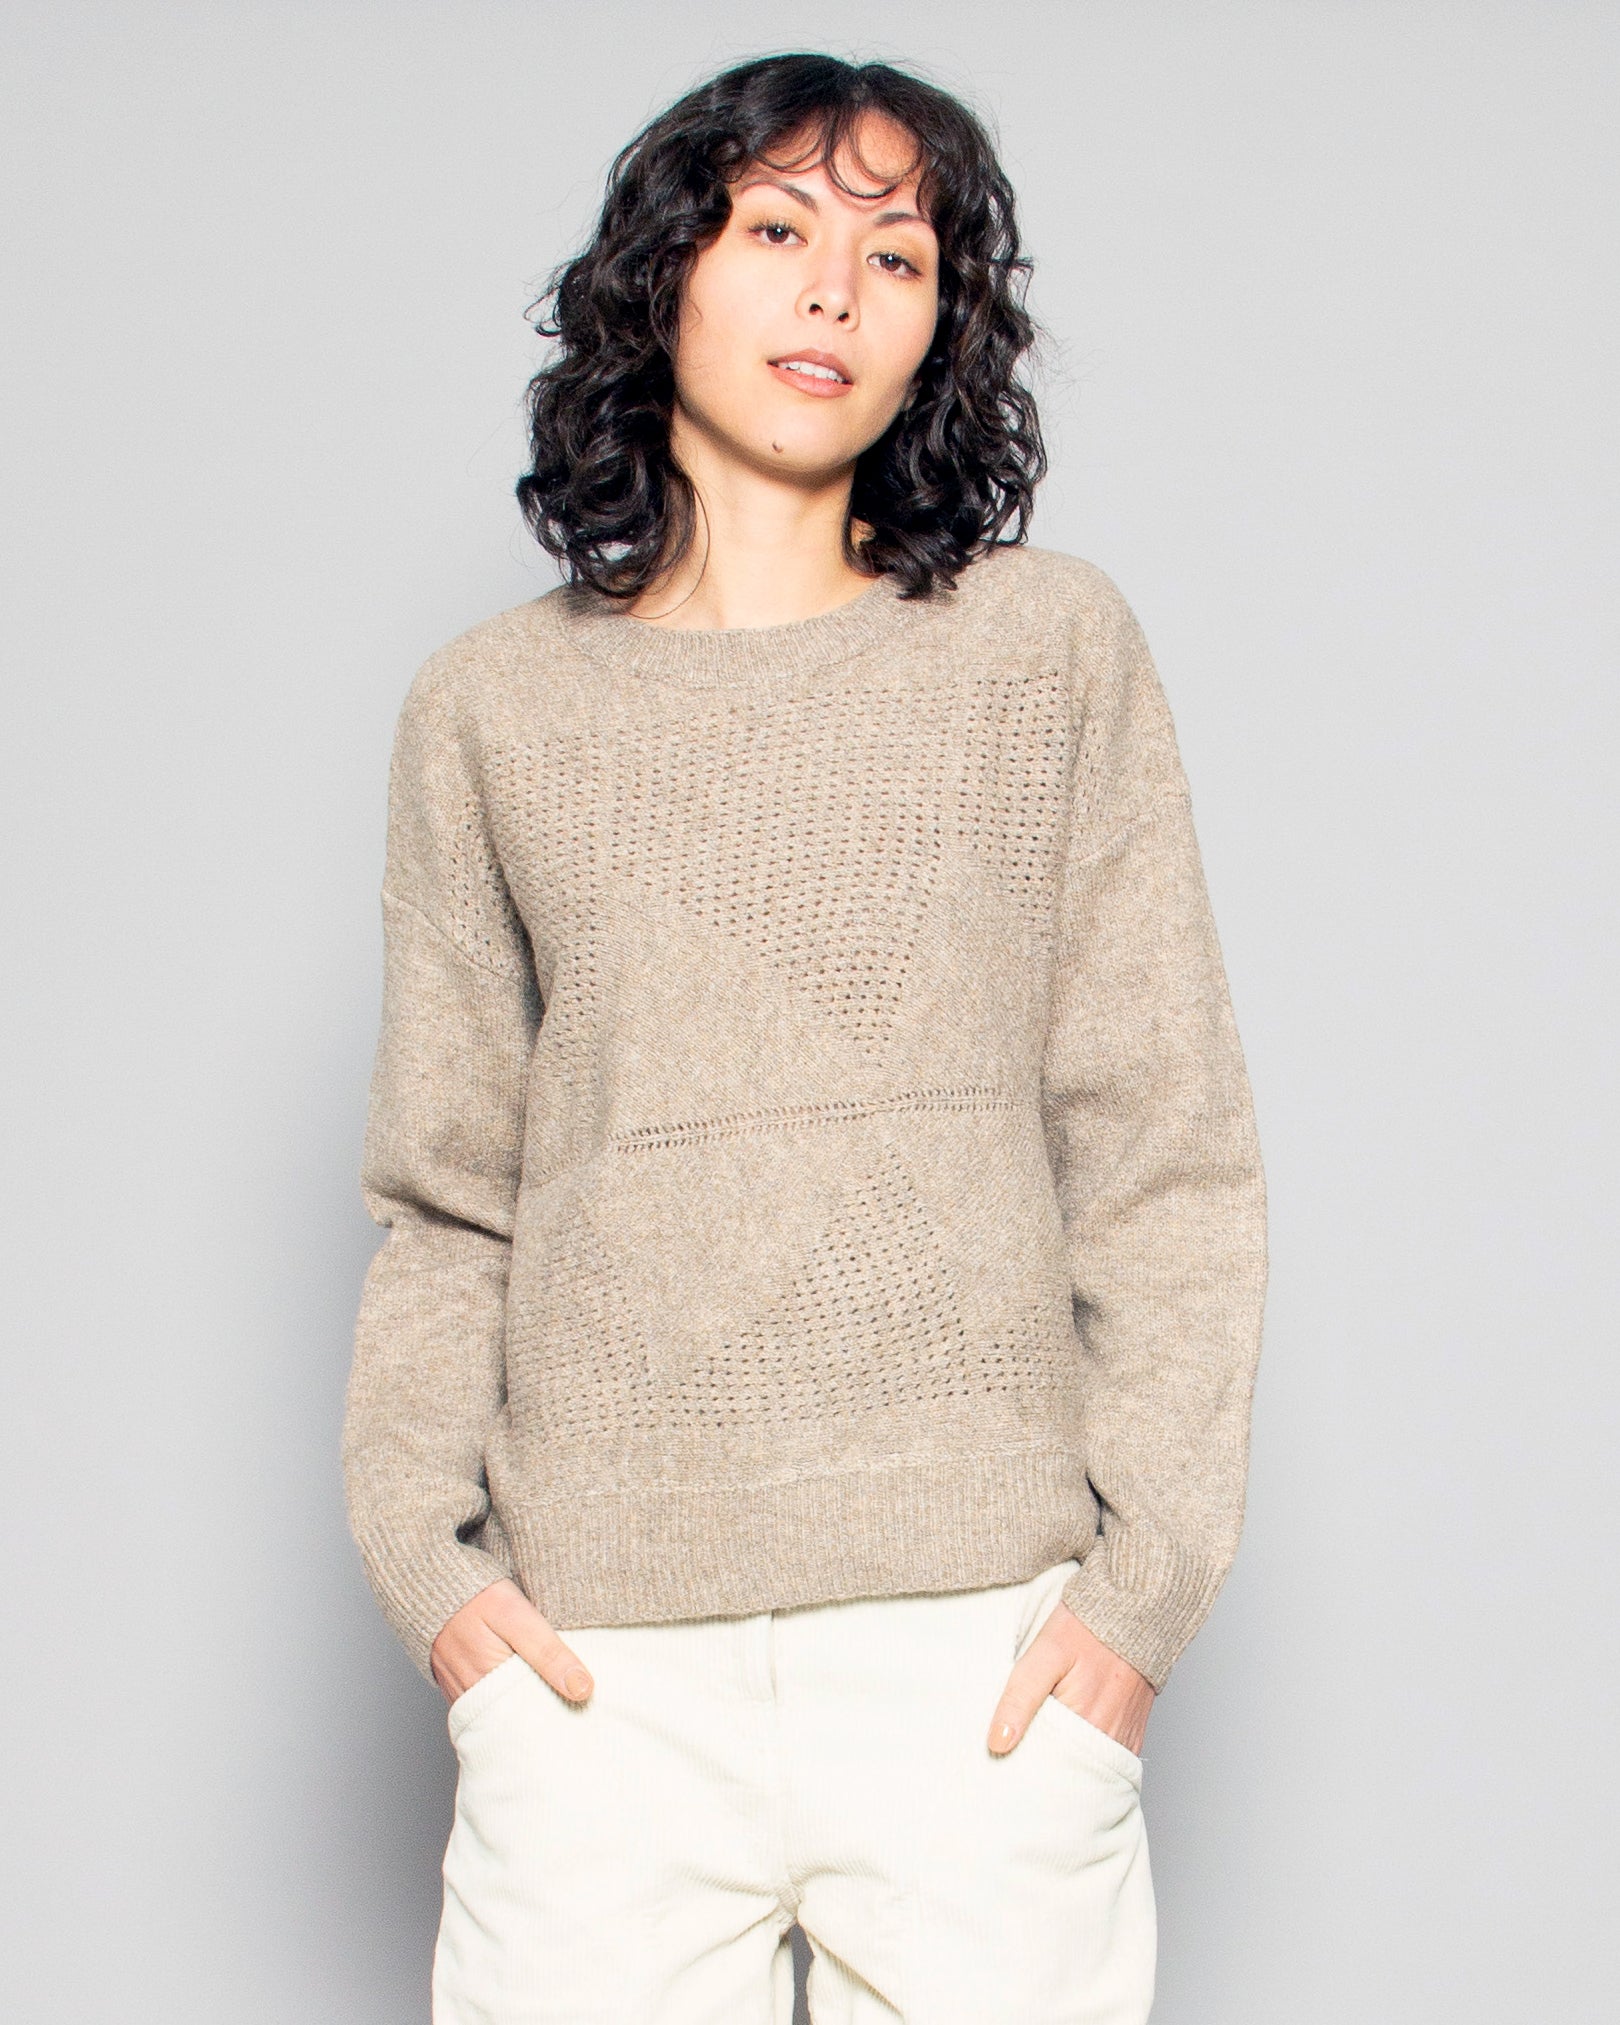 PERSONS Evelyn Pointelle Wool Blend Sweater in Mocha available at Lahn.shop